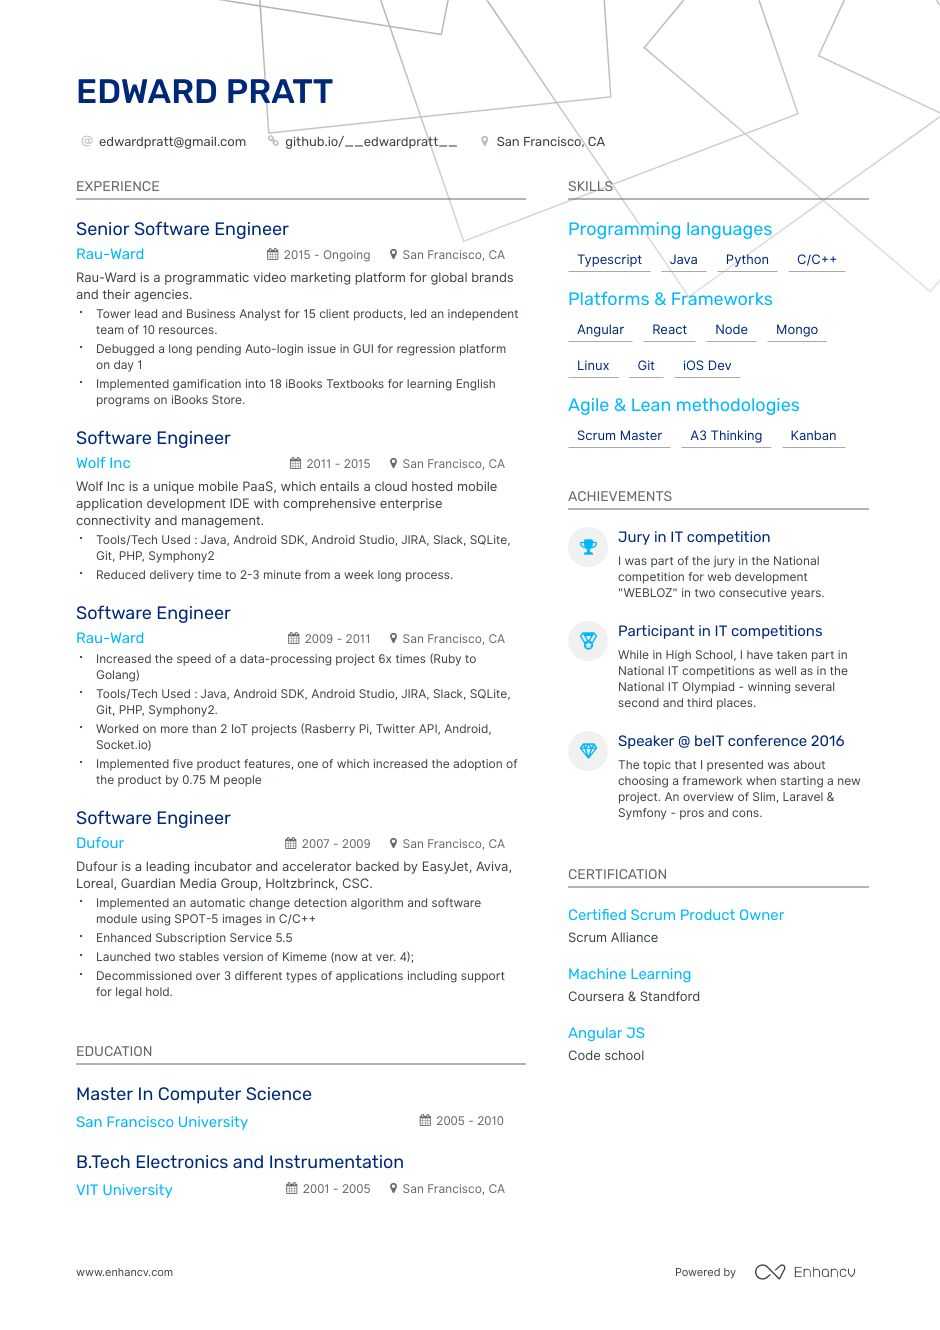 Software Engineer Resume: 8-Step Ultimate Guide for 2020 ...